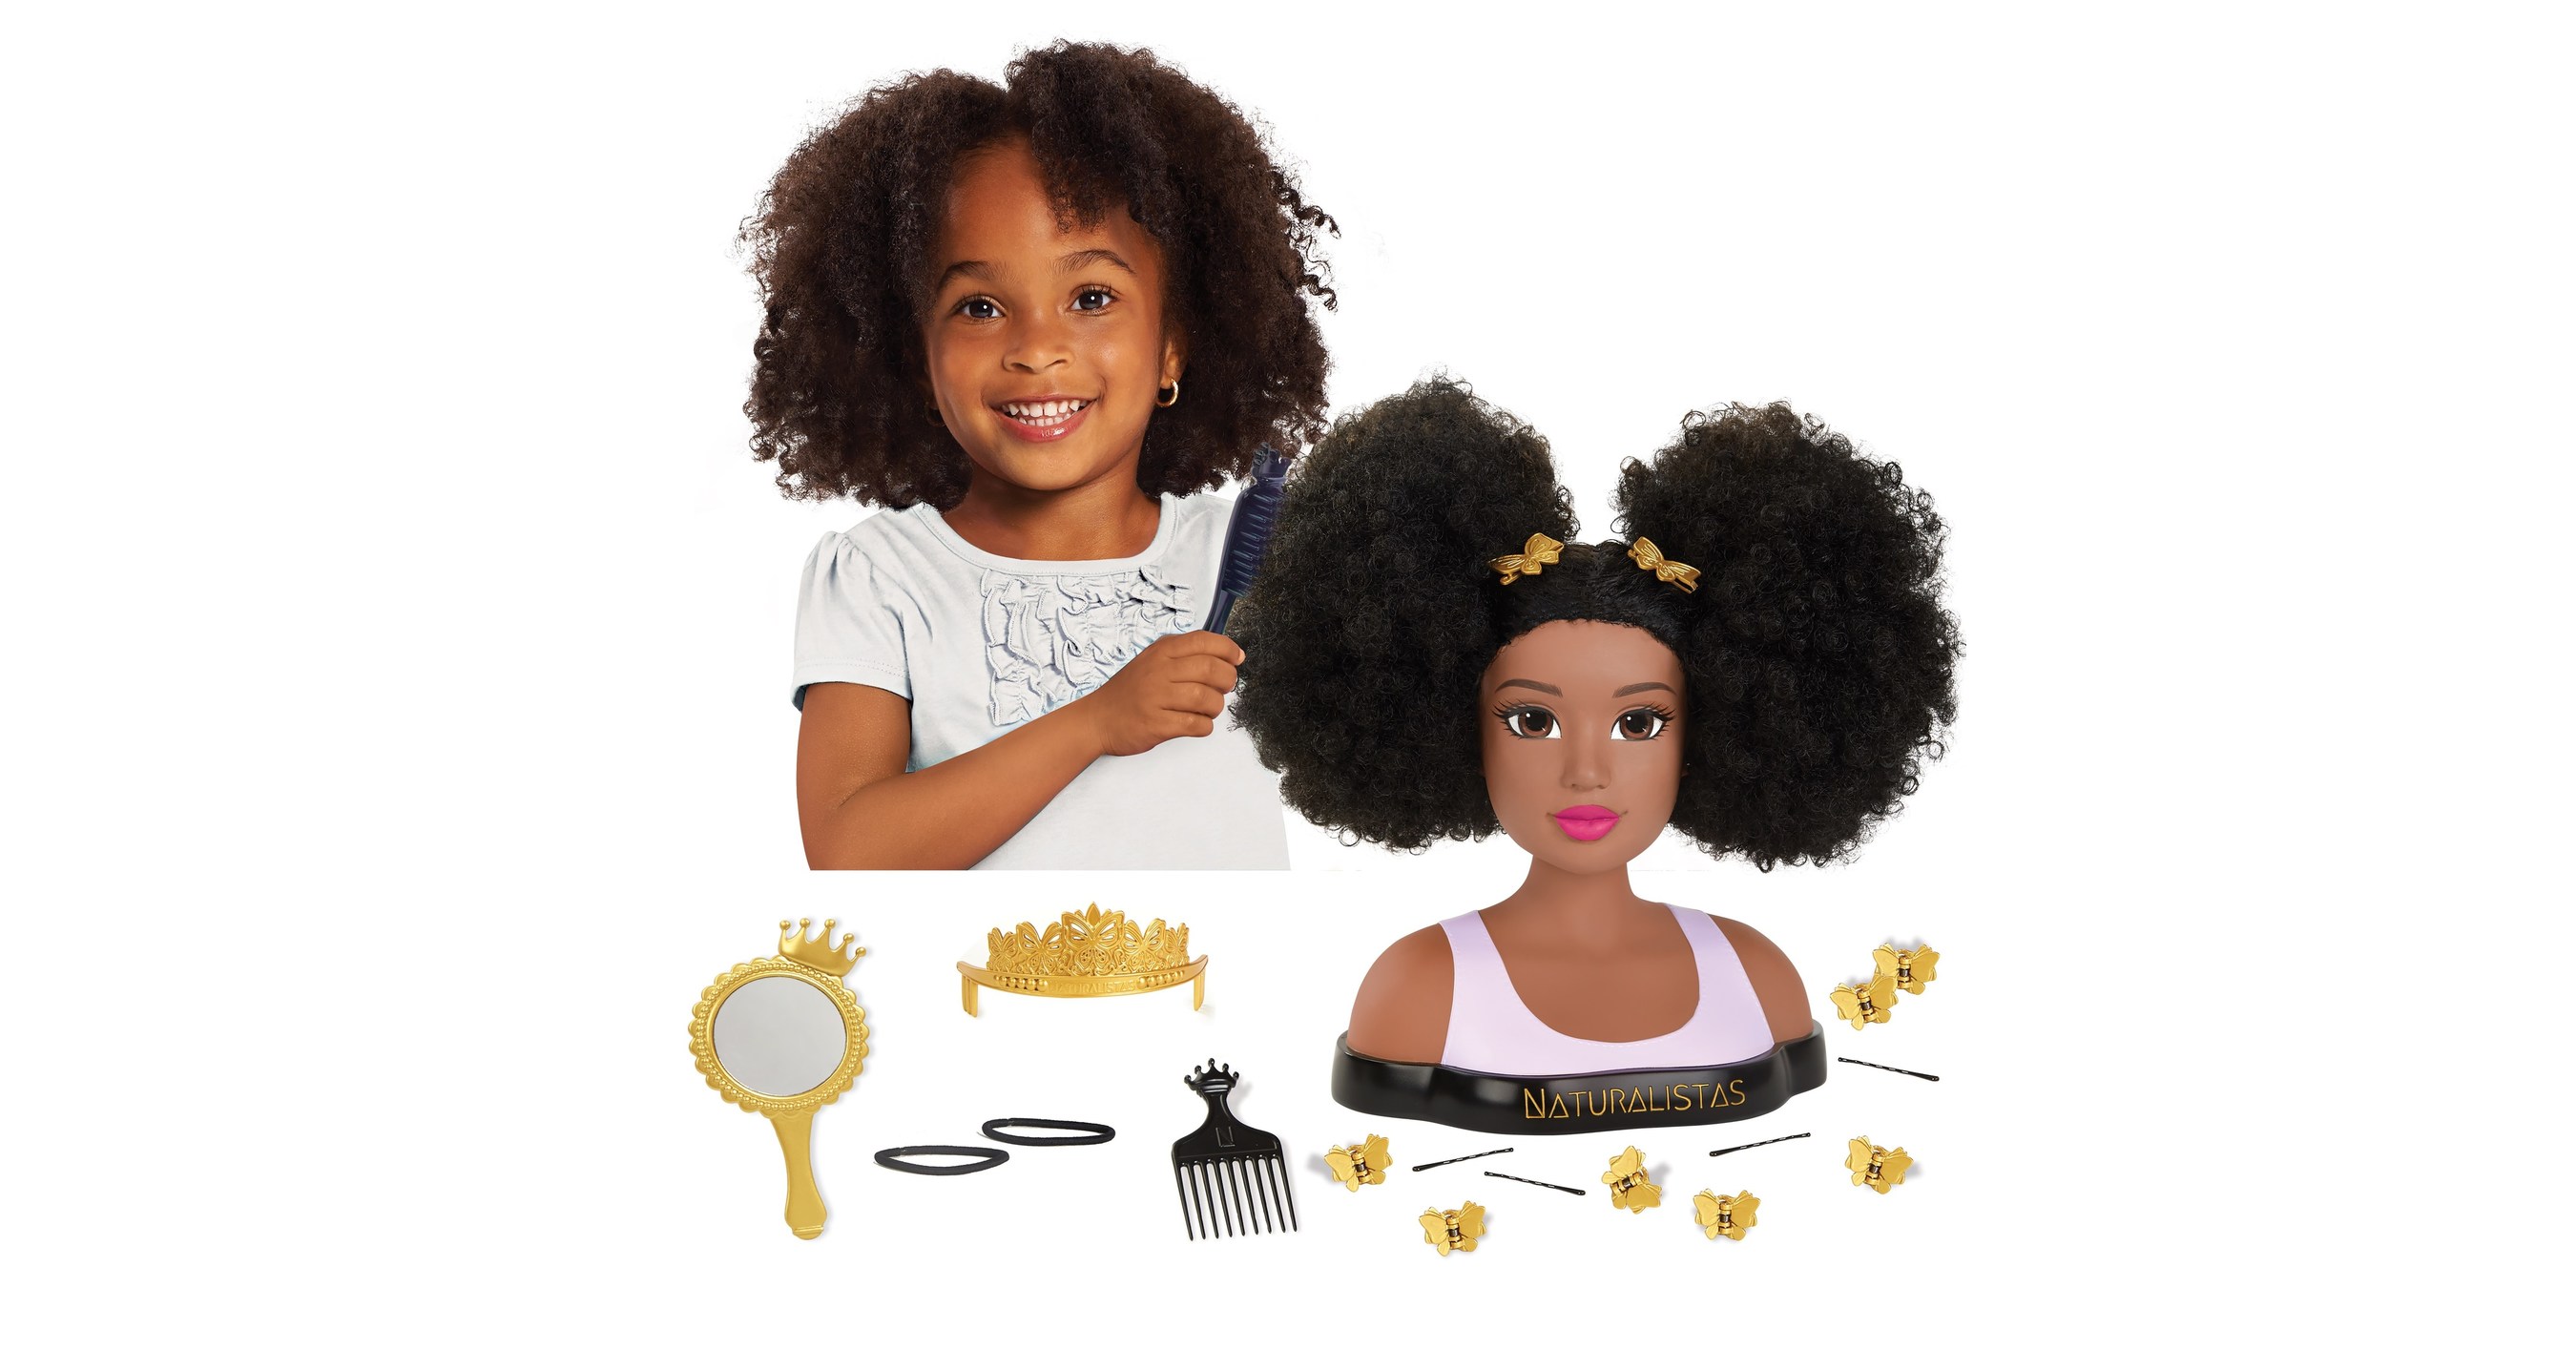 In Recognition of National Afro Day, Prominent Black-Owned Toy Company,  Purpose Toys, Unveils  Exclusive Crown and Coils Styling-Head Set,  An Extension of the World's First and Only Line of Natural Hair